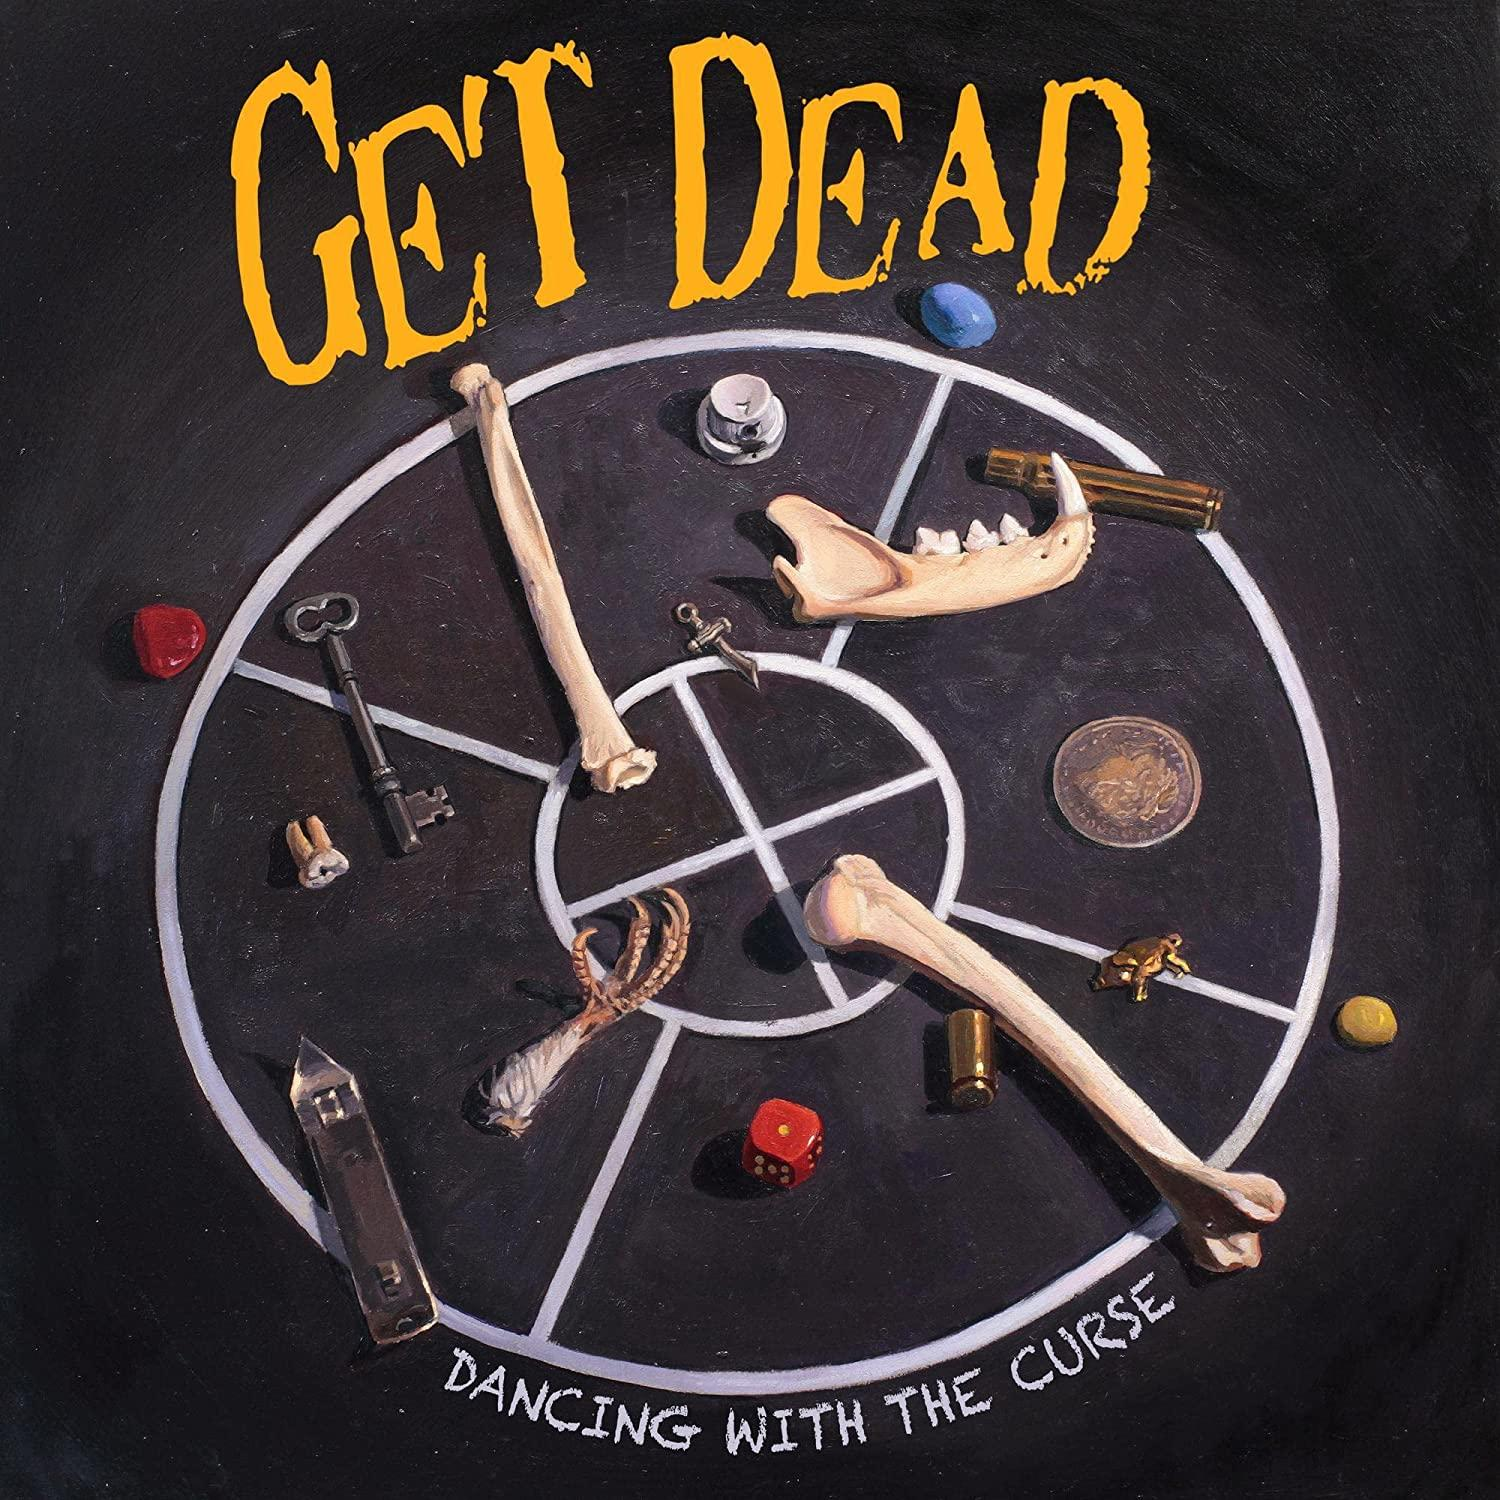 Get Dead (LP Dancing Curse + The - - Download) With